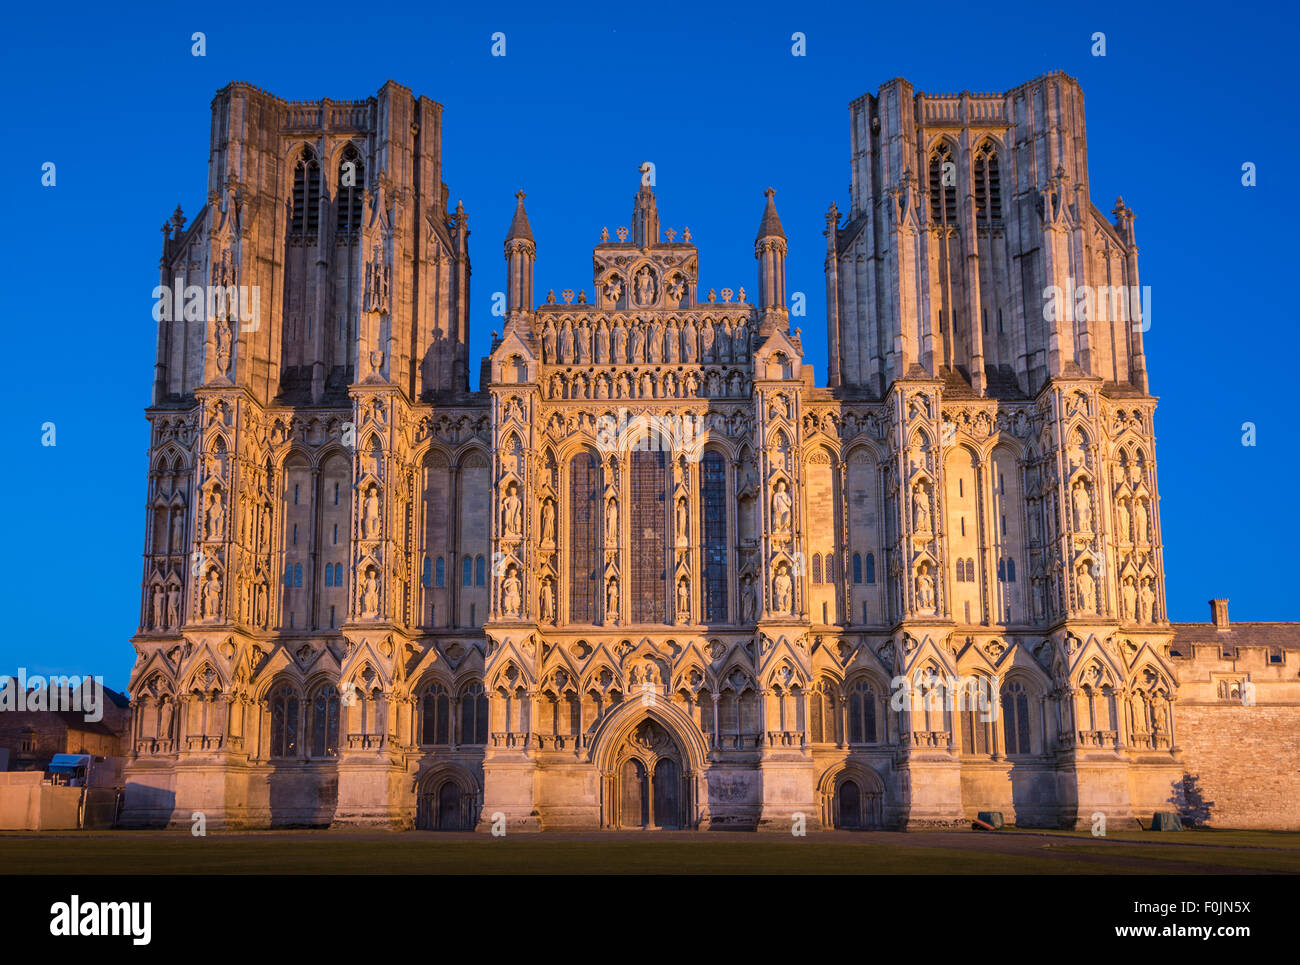 The Early English Gothic West front of Wells Cathedral in the small city of Wells, Somerset, England, UK, taken in the blue hour Stock Photo